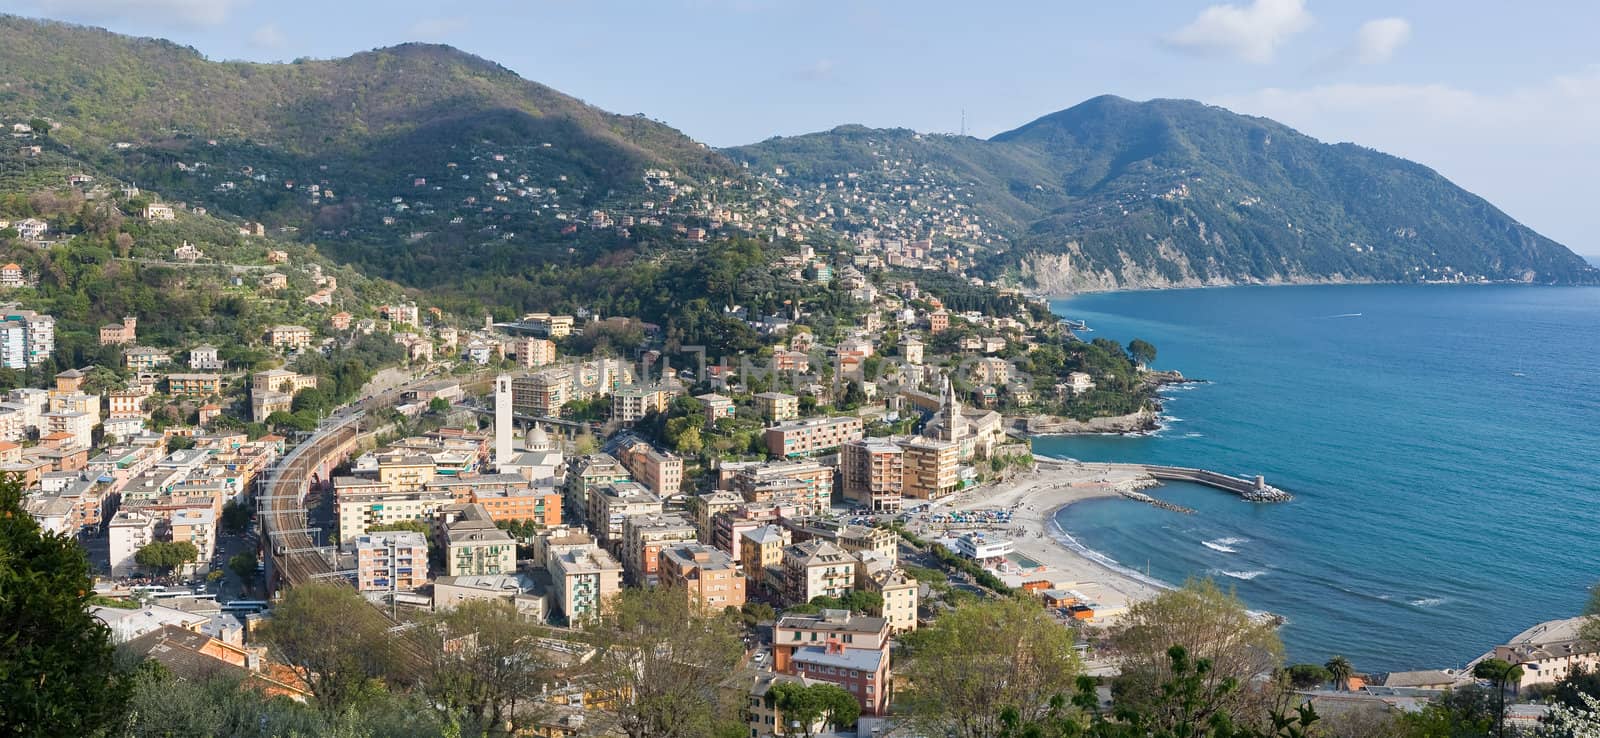 aerial view of Recco, small town in Liguria, Italy